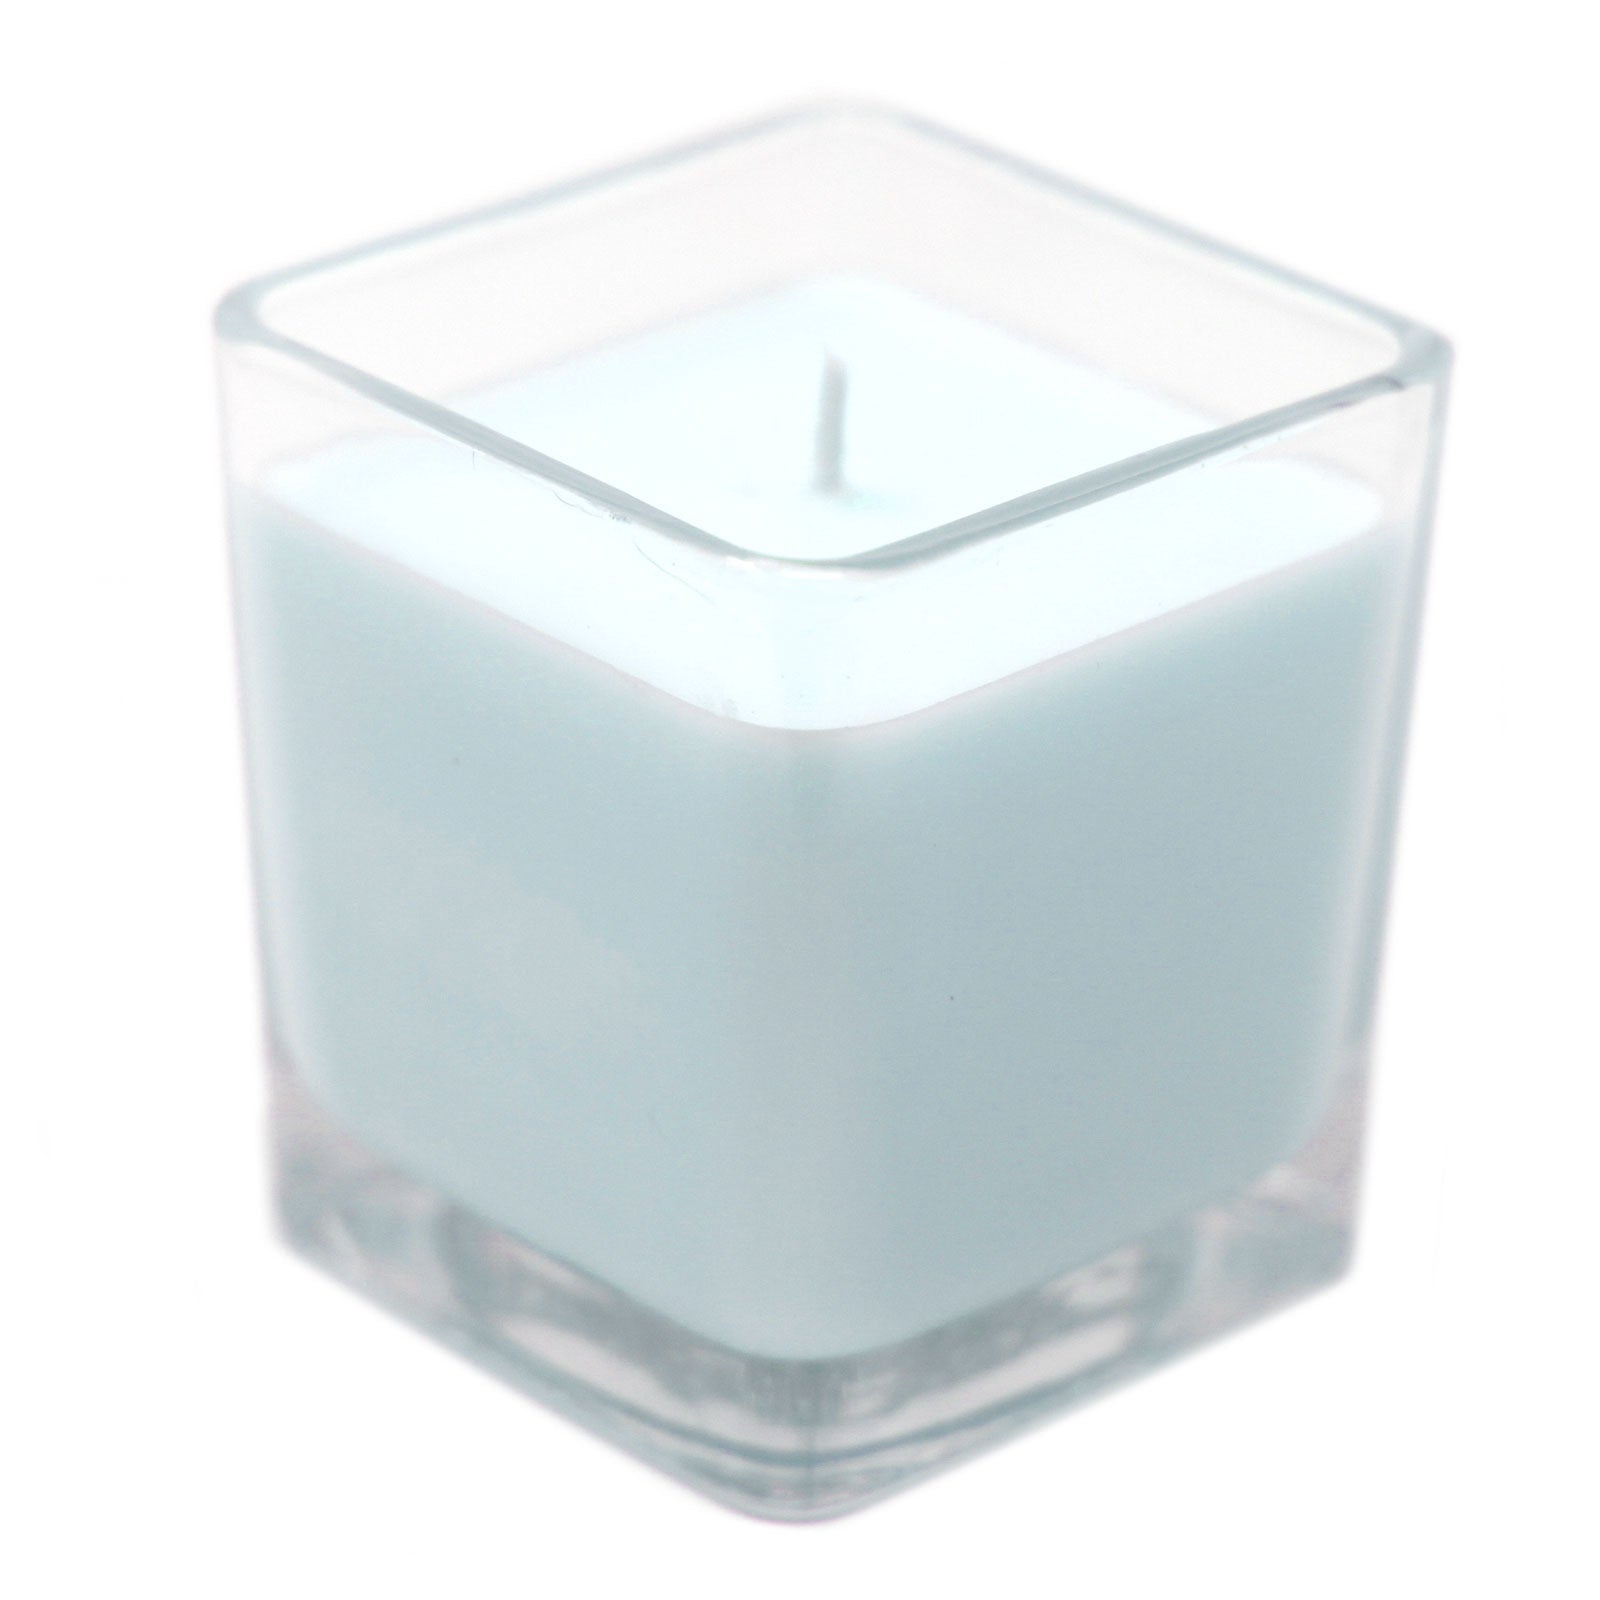 View White Label Soy Wax Jar Candle Baby Powder information